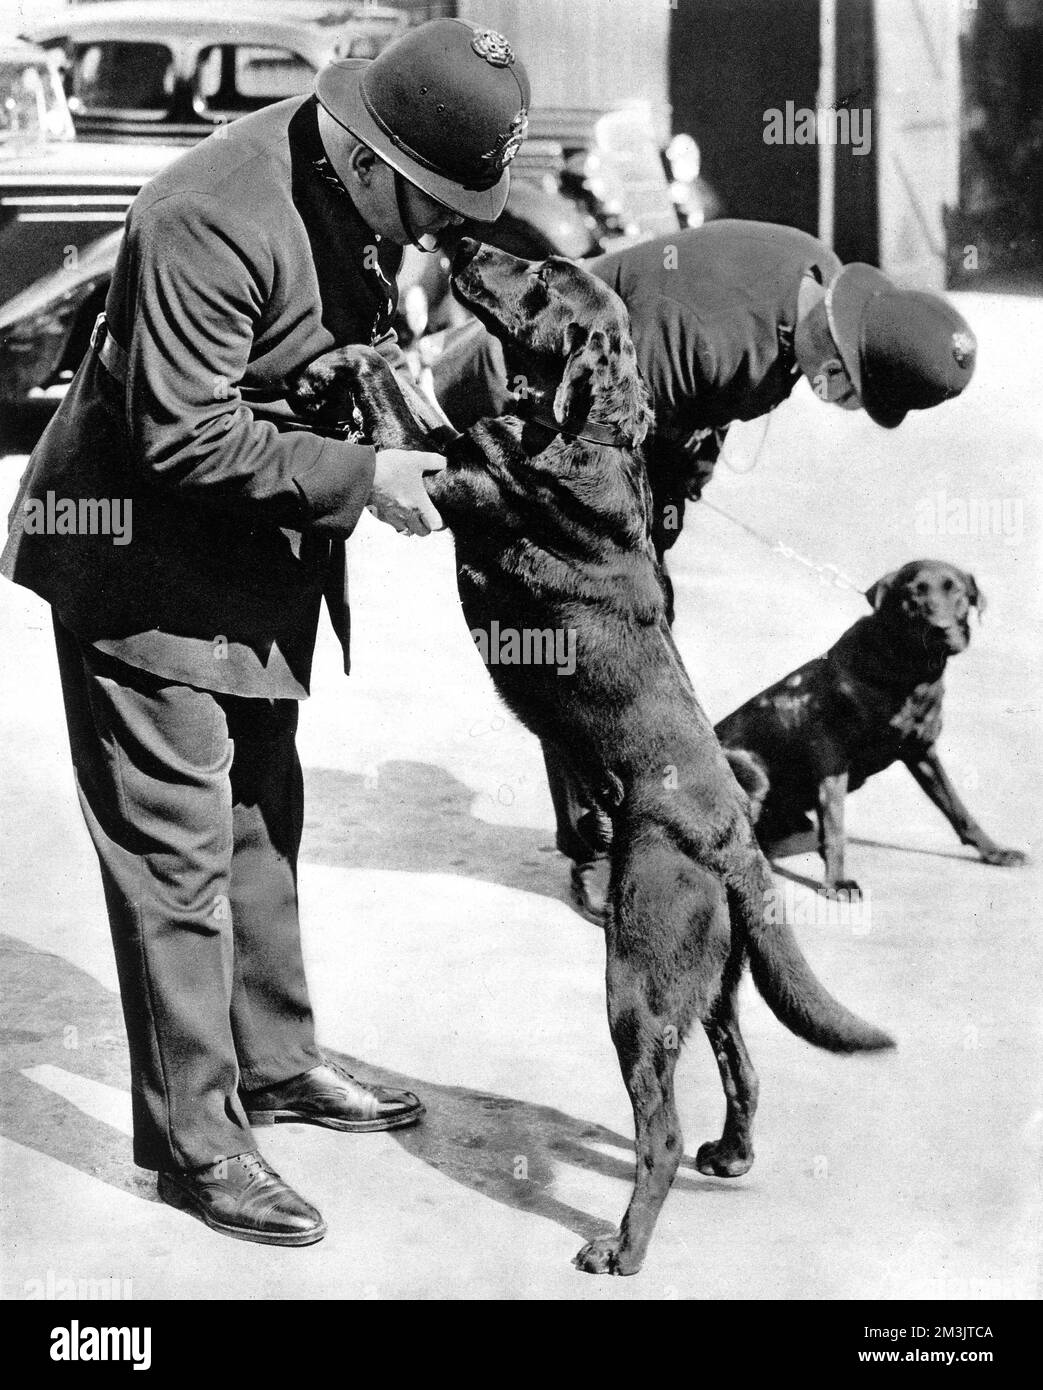 Front cover photograph showing two London policemen with the first Metropolitan police-dogs in 1938, thirty years after the first dogs were used by the North Eastern Railway Police to patrol Hull docks.  The two labradors were introduced in Peckham to accompany constables on lonely beats, for carrying messages back to the station and tracking suspects.     Date: 1938 Stock Photo